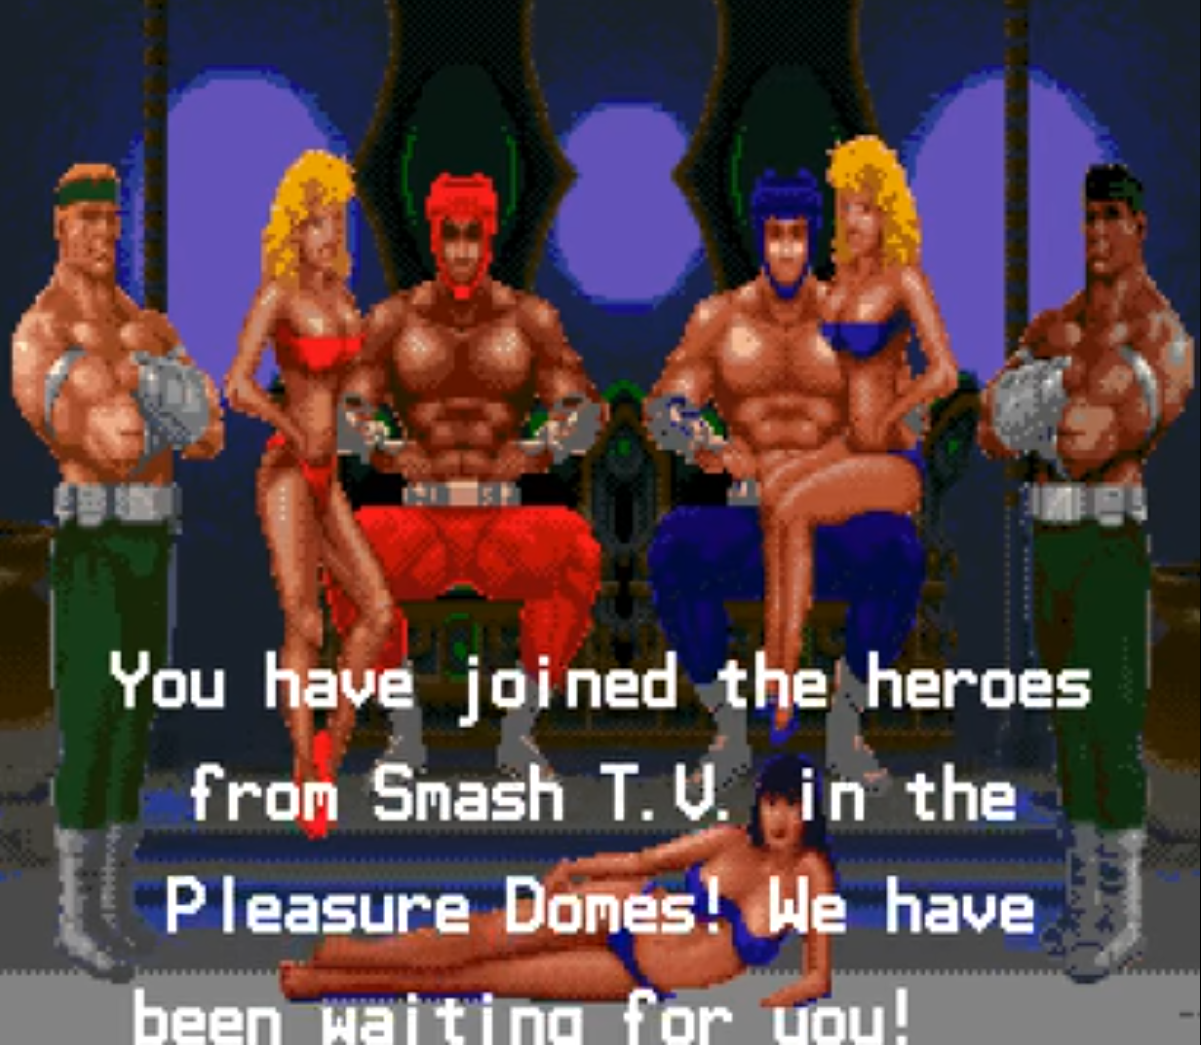 games - You have joined the heroes from Smash T.V. in the Pleasure Domes! We have been waiting for uou!